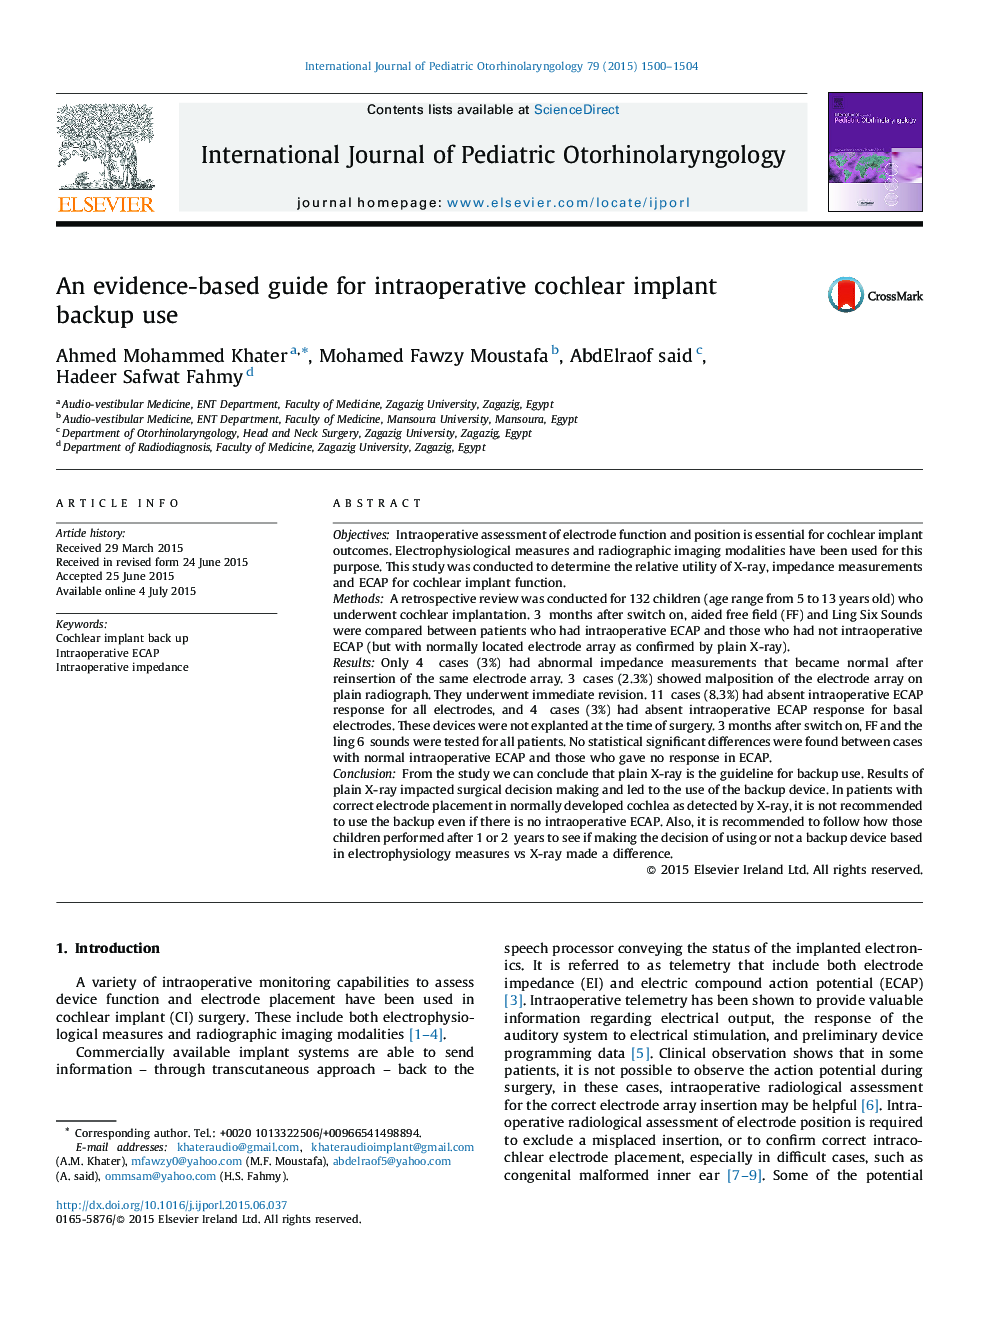 An evidence-based guide for intraoperative cochlear implant backup use